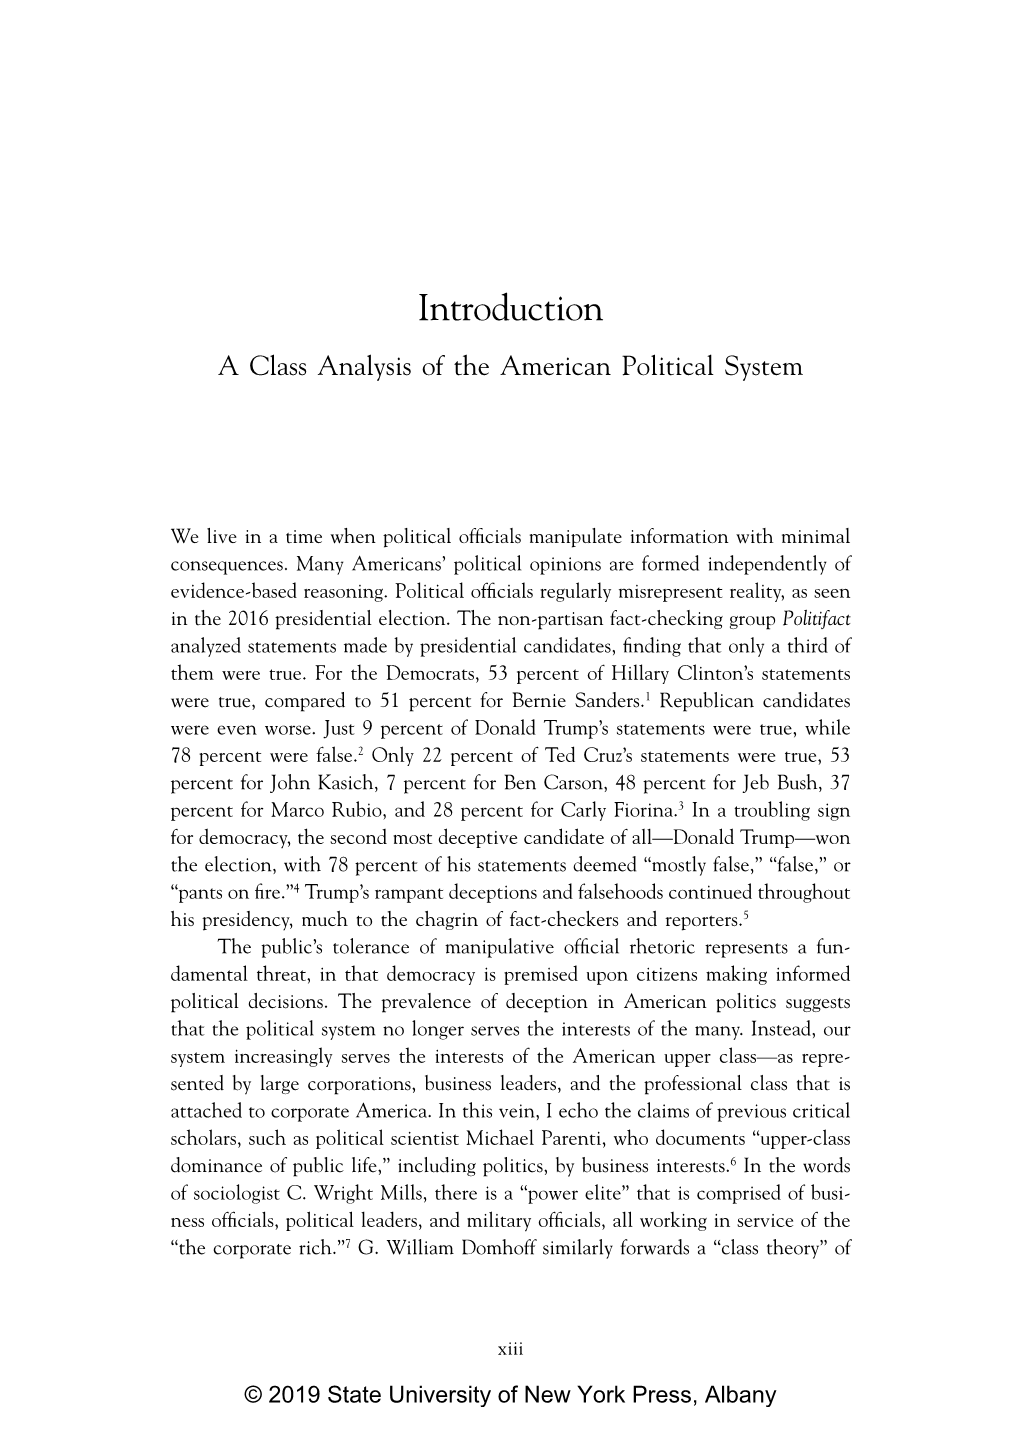 Introduction a Class Analysis of the American Political System